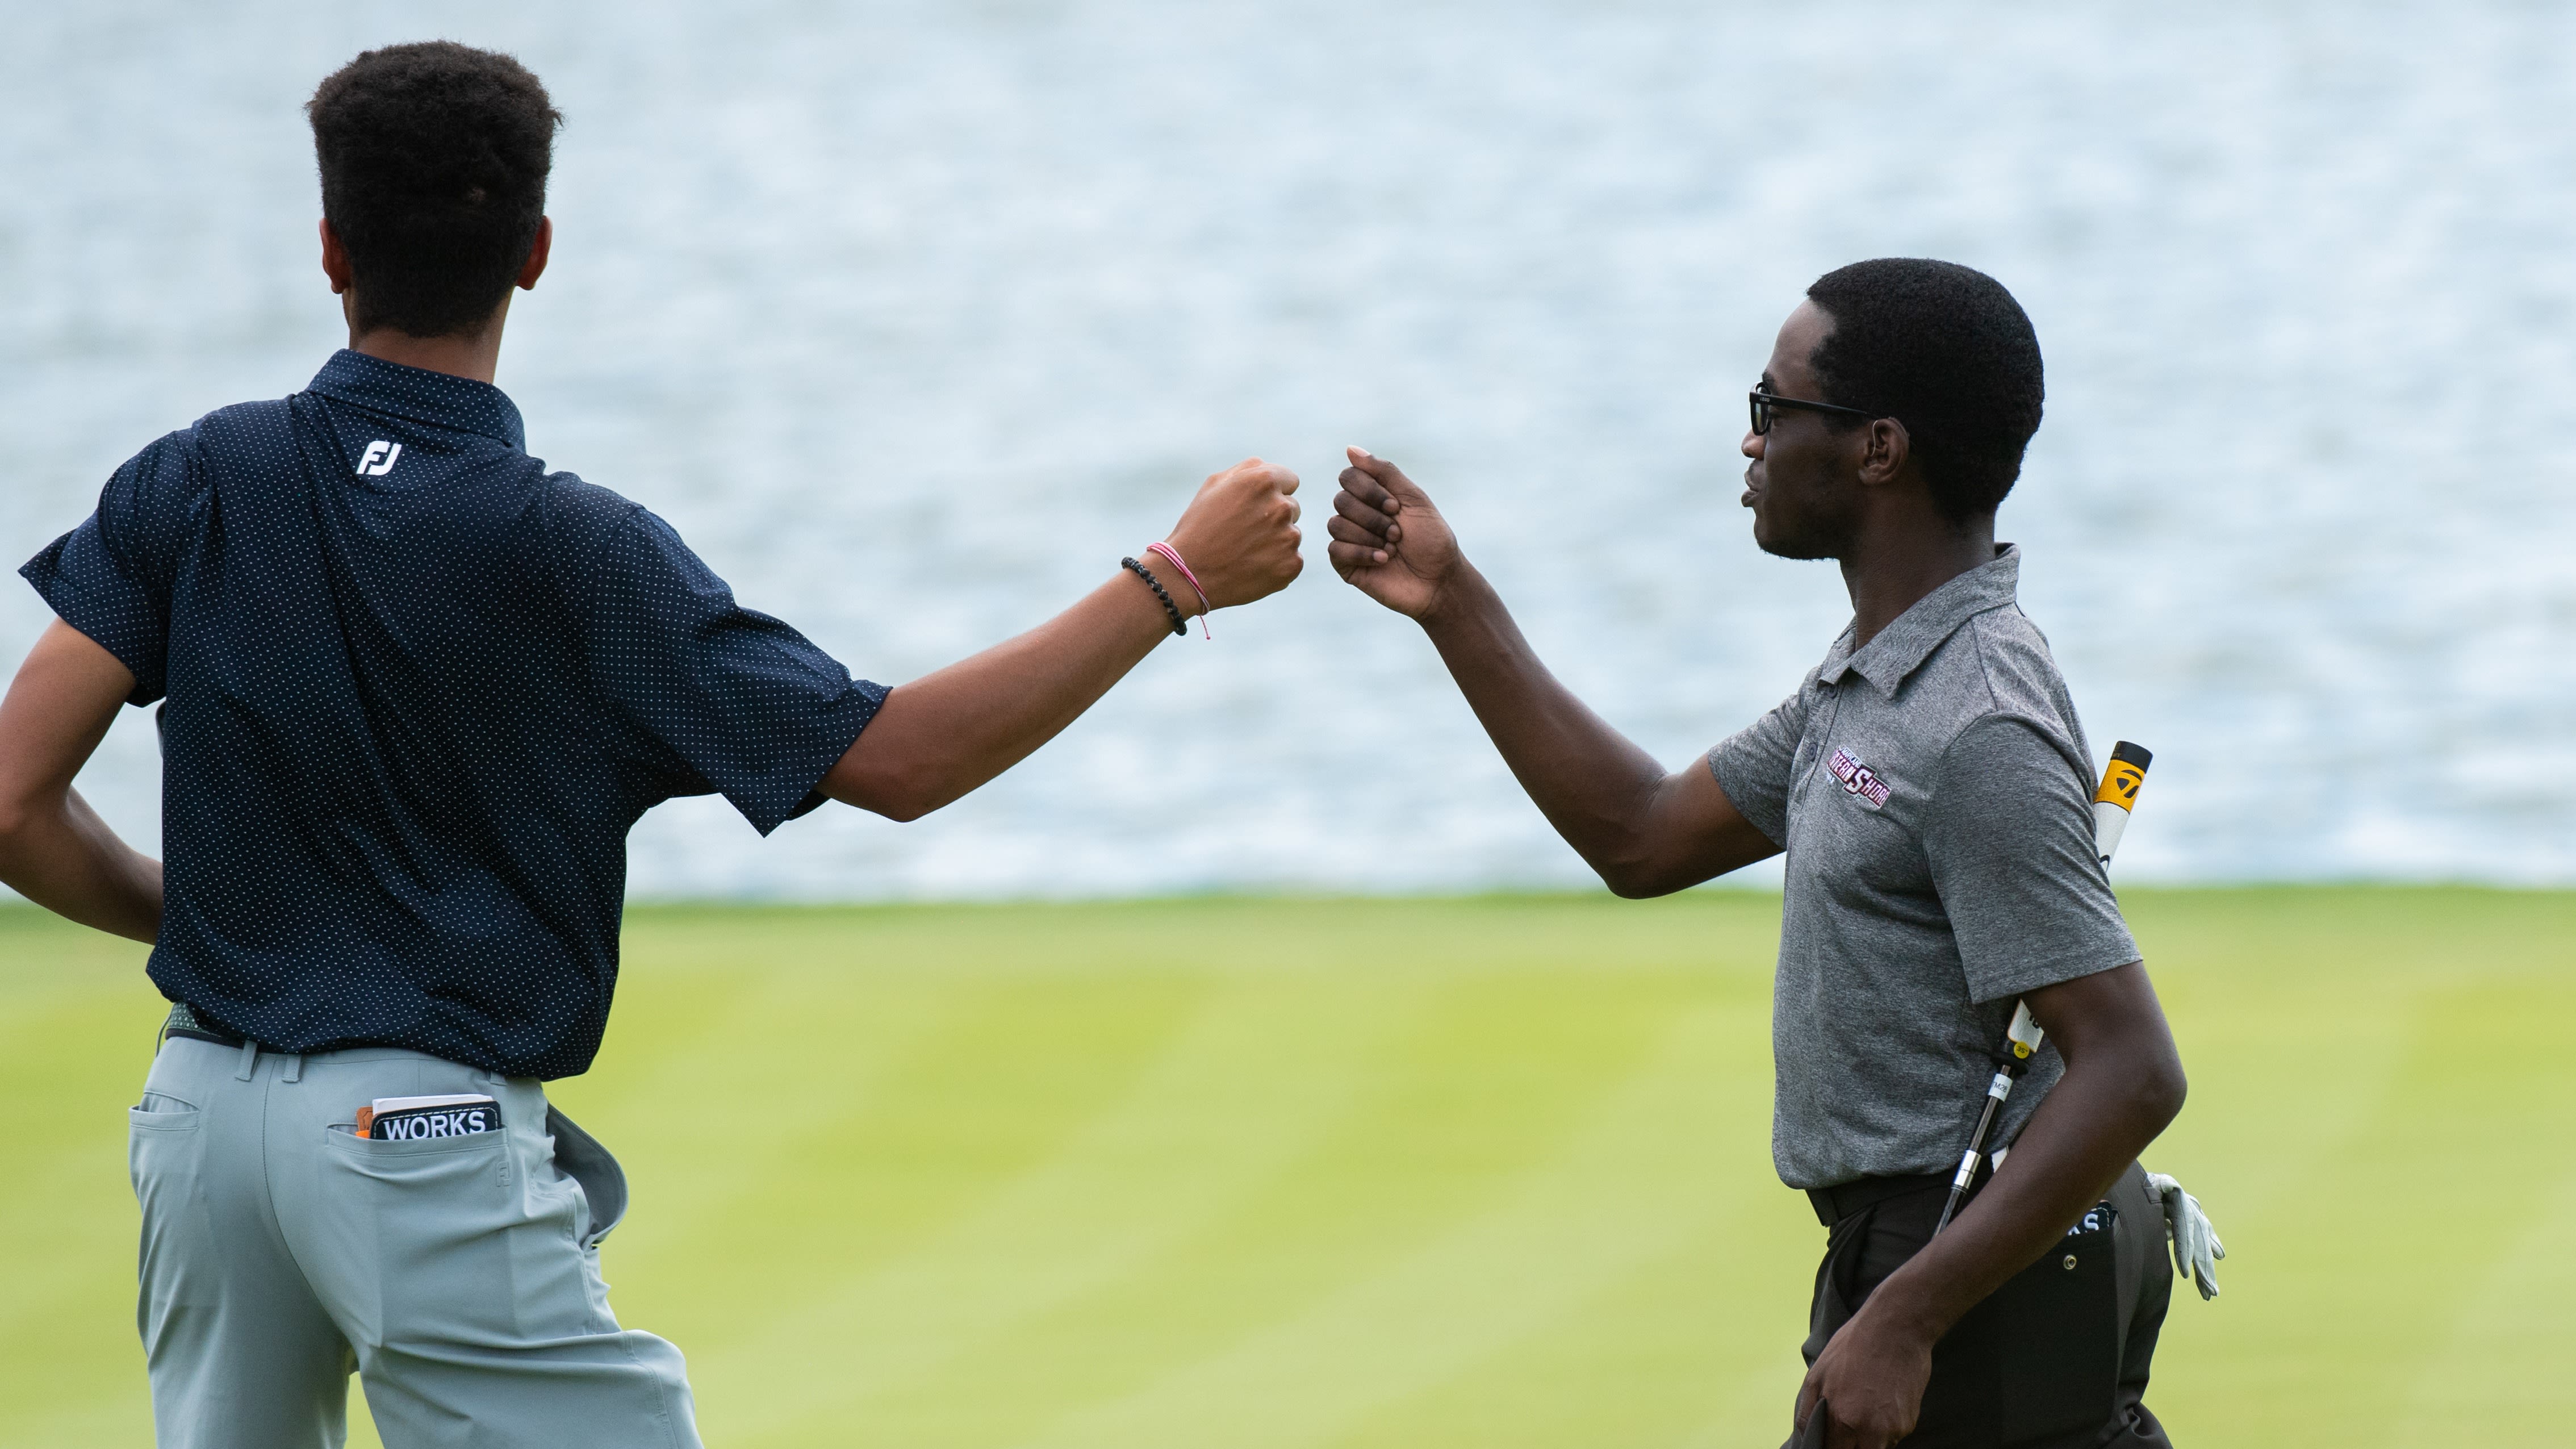 Langston Frazier (right) is one of 15 PGA Members selected to be part of PGA LEAD's class of 2023-24.